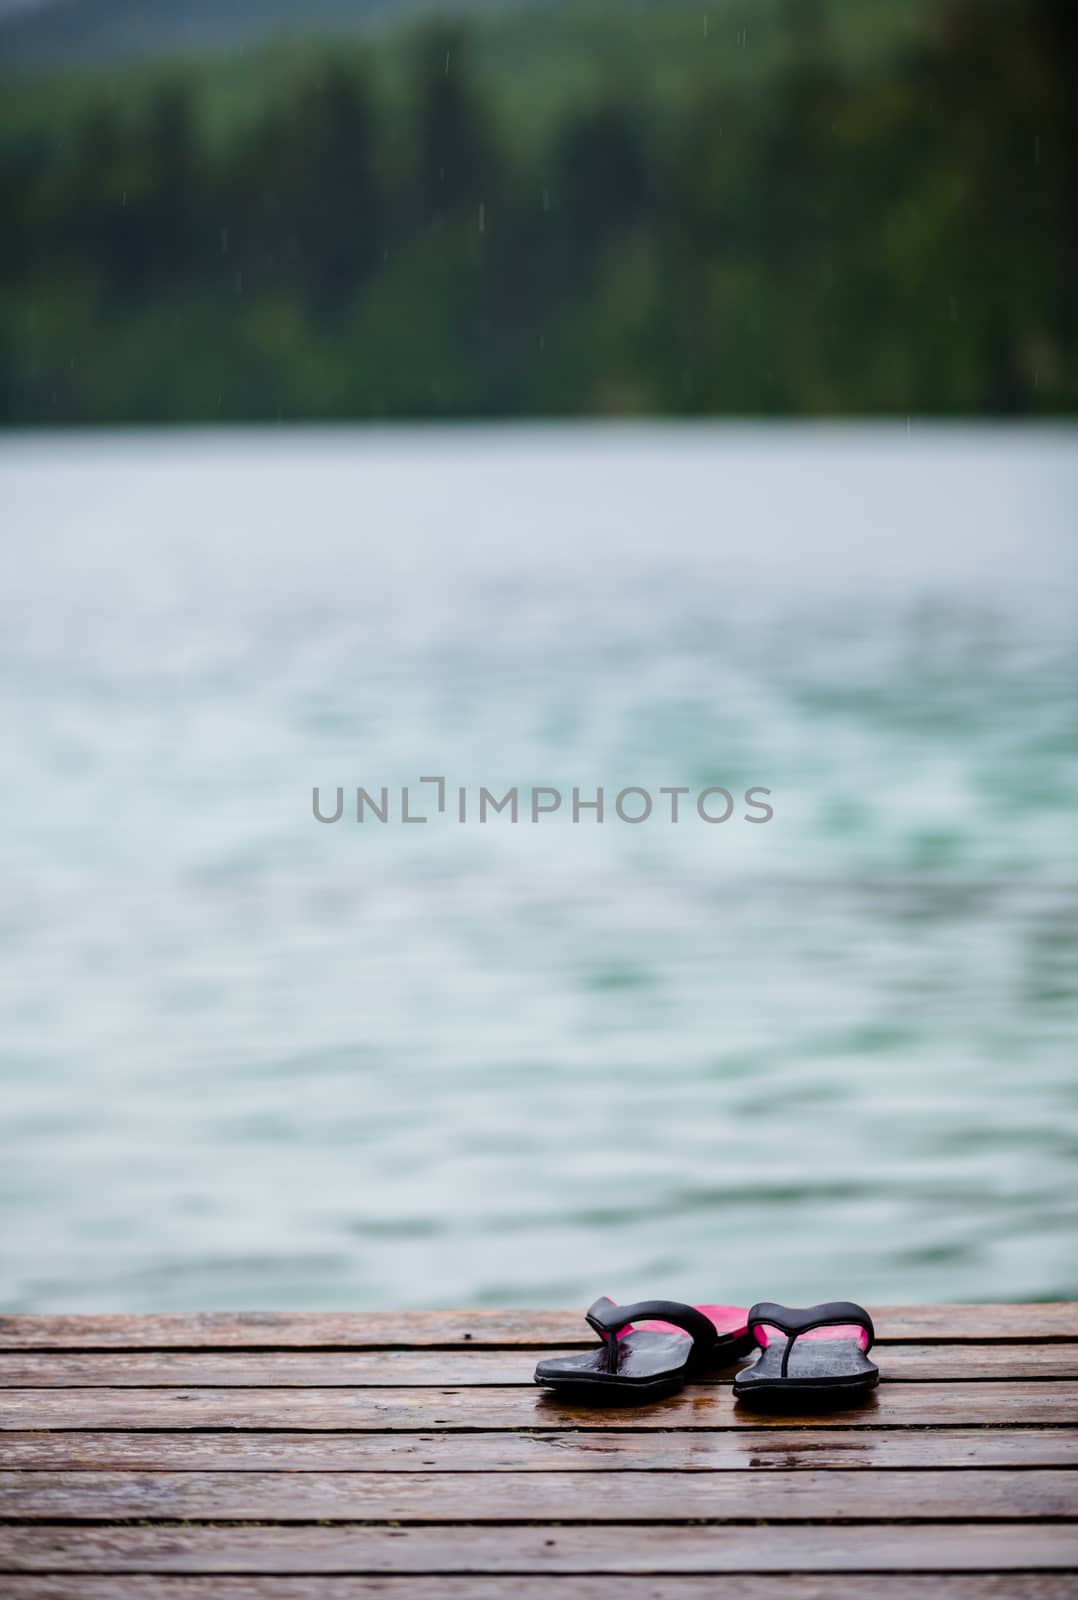 Flip flops on a Dock in front of a Turquoise Water Lake by aetb